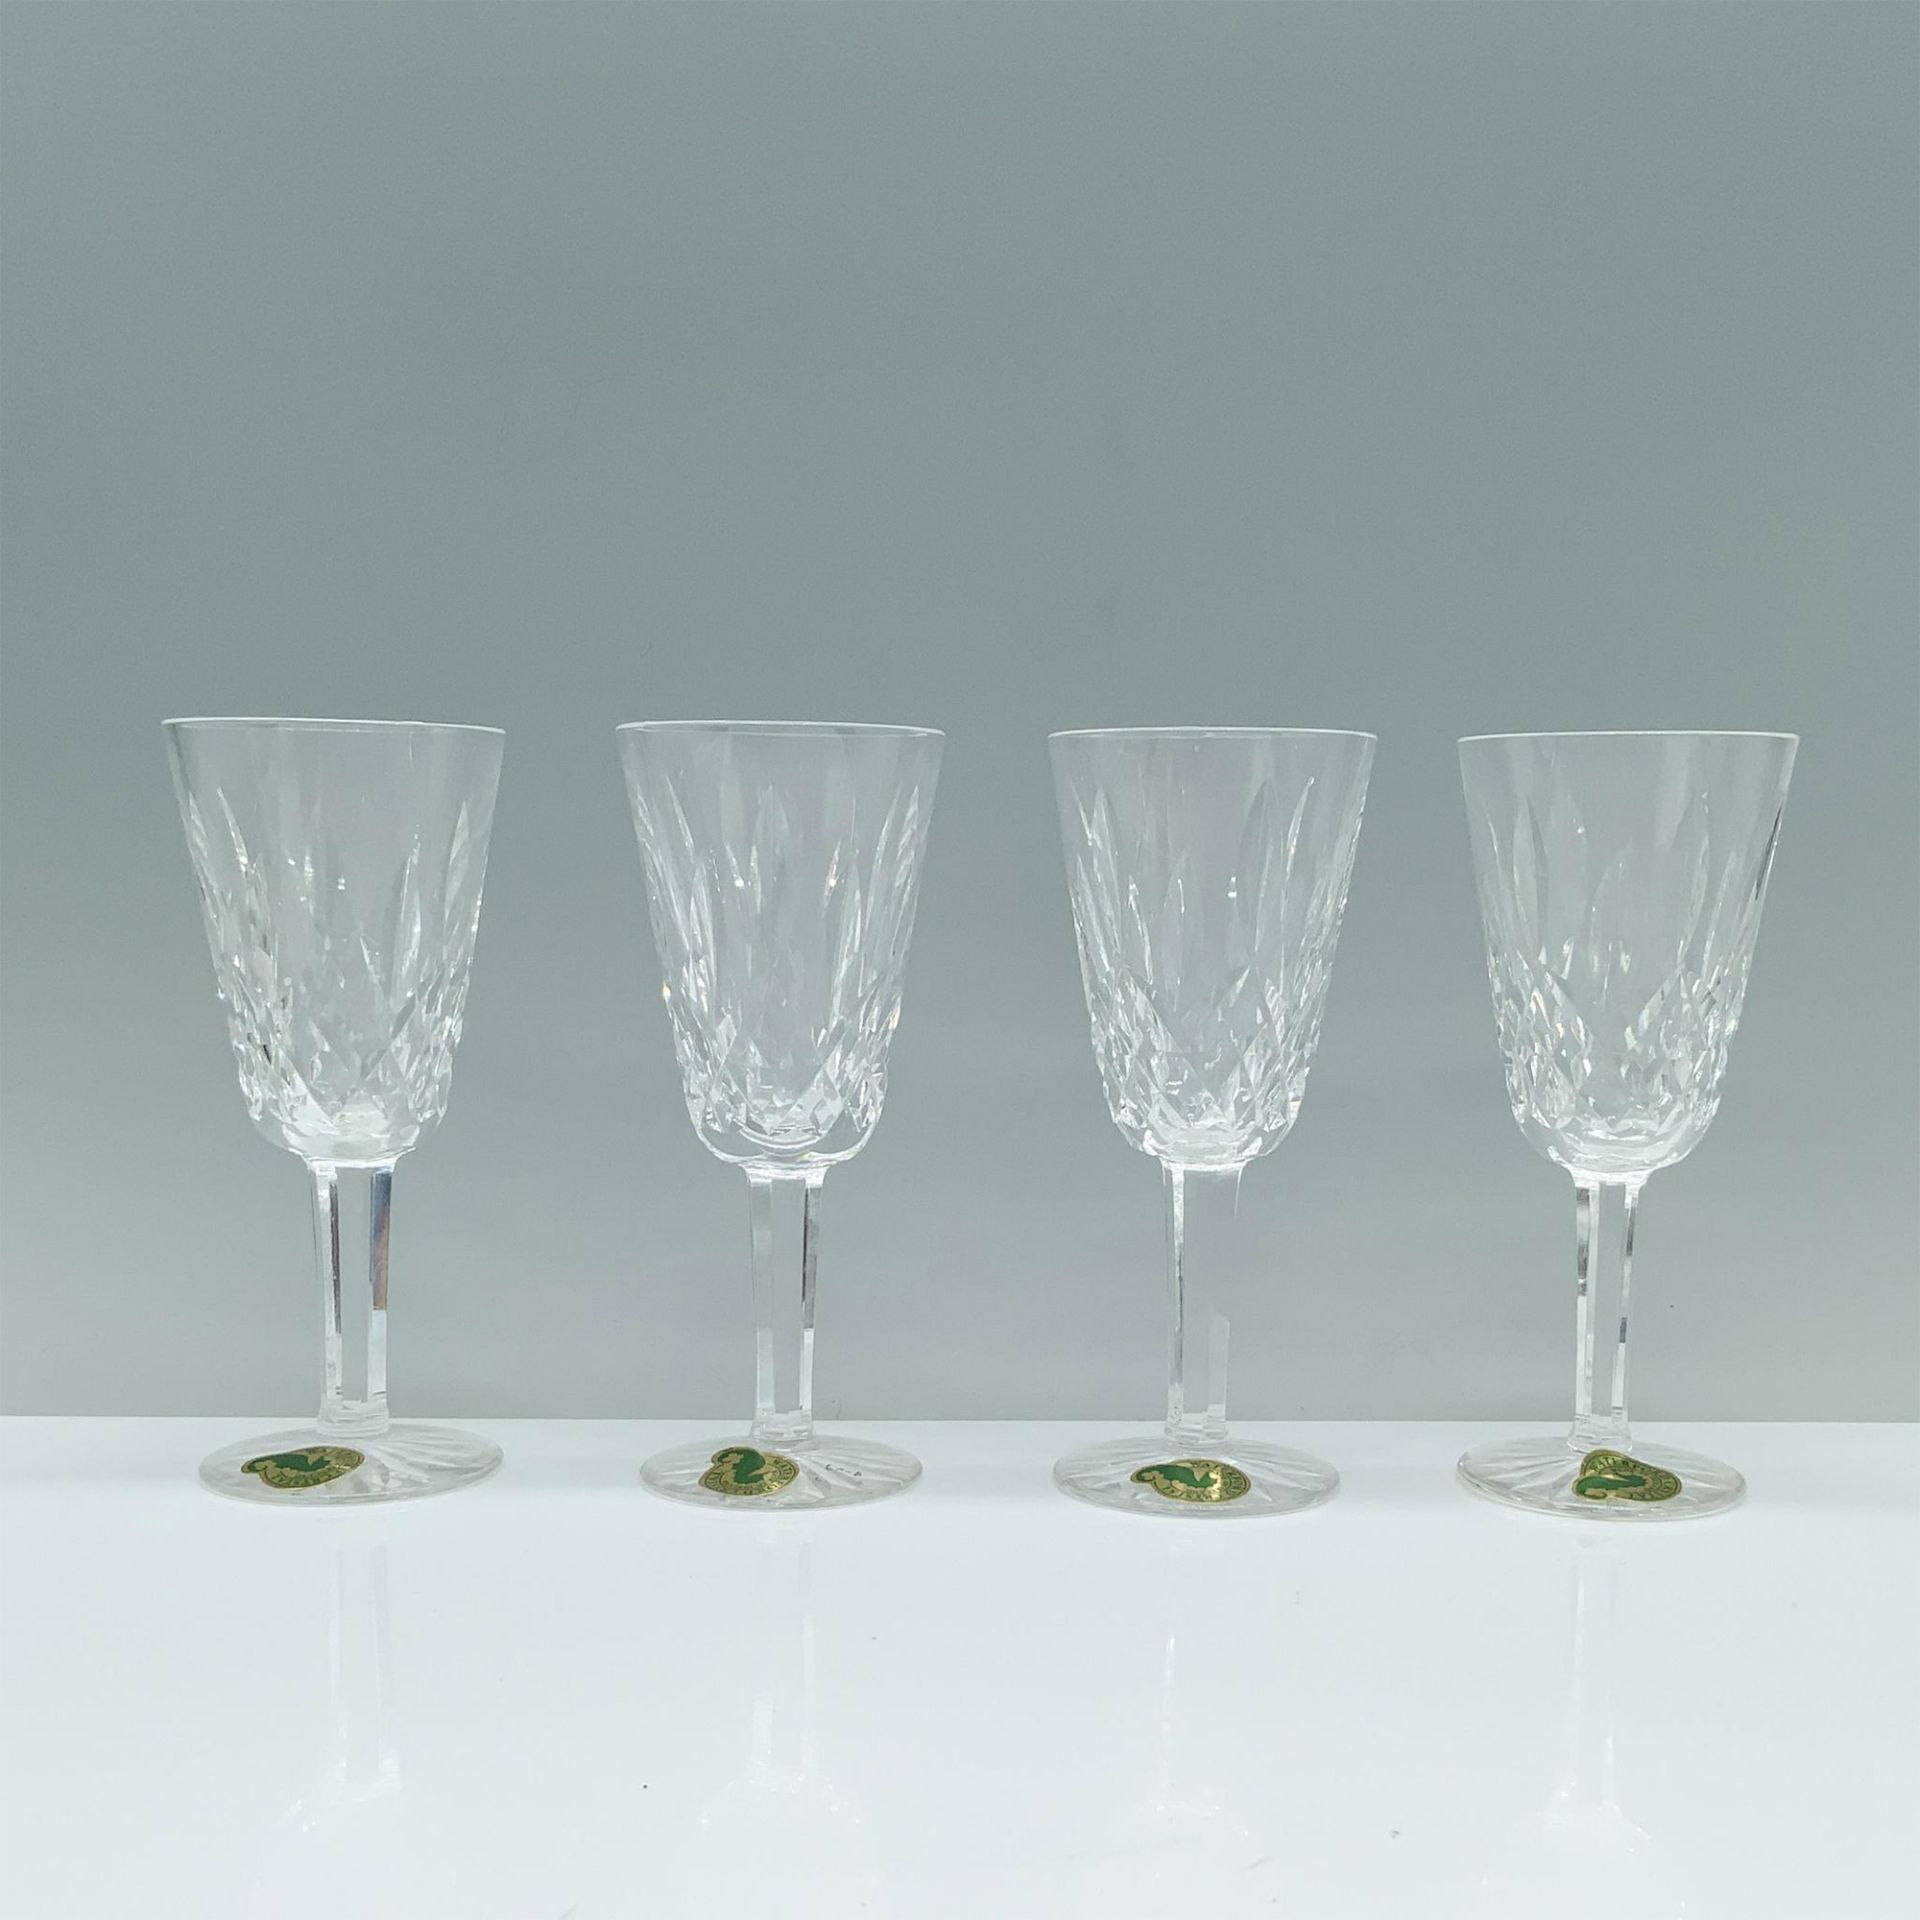 4pc Waterford Crystal Sherry Glass, Lismore